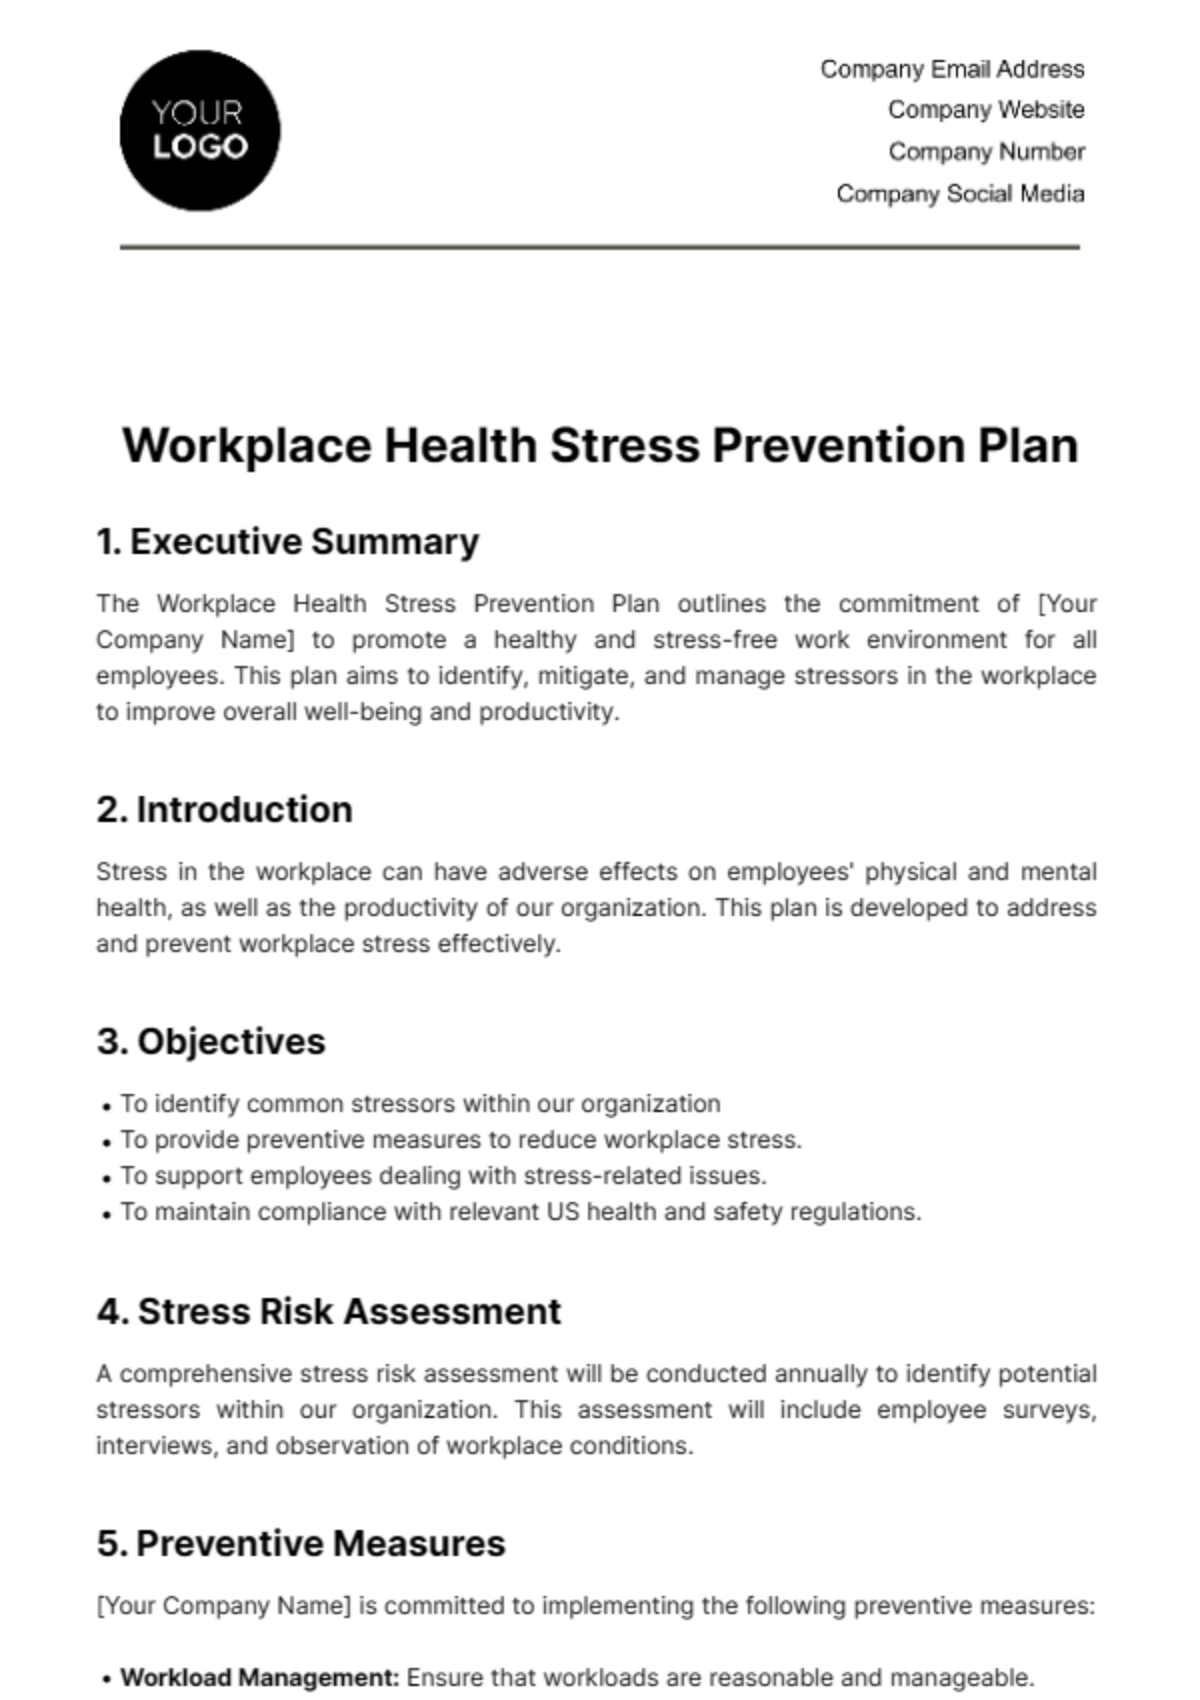 Free Workplace Health Stress Prevention Plan Template